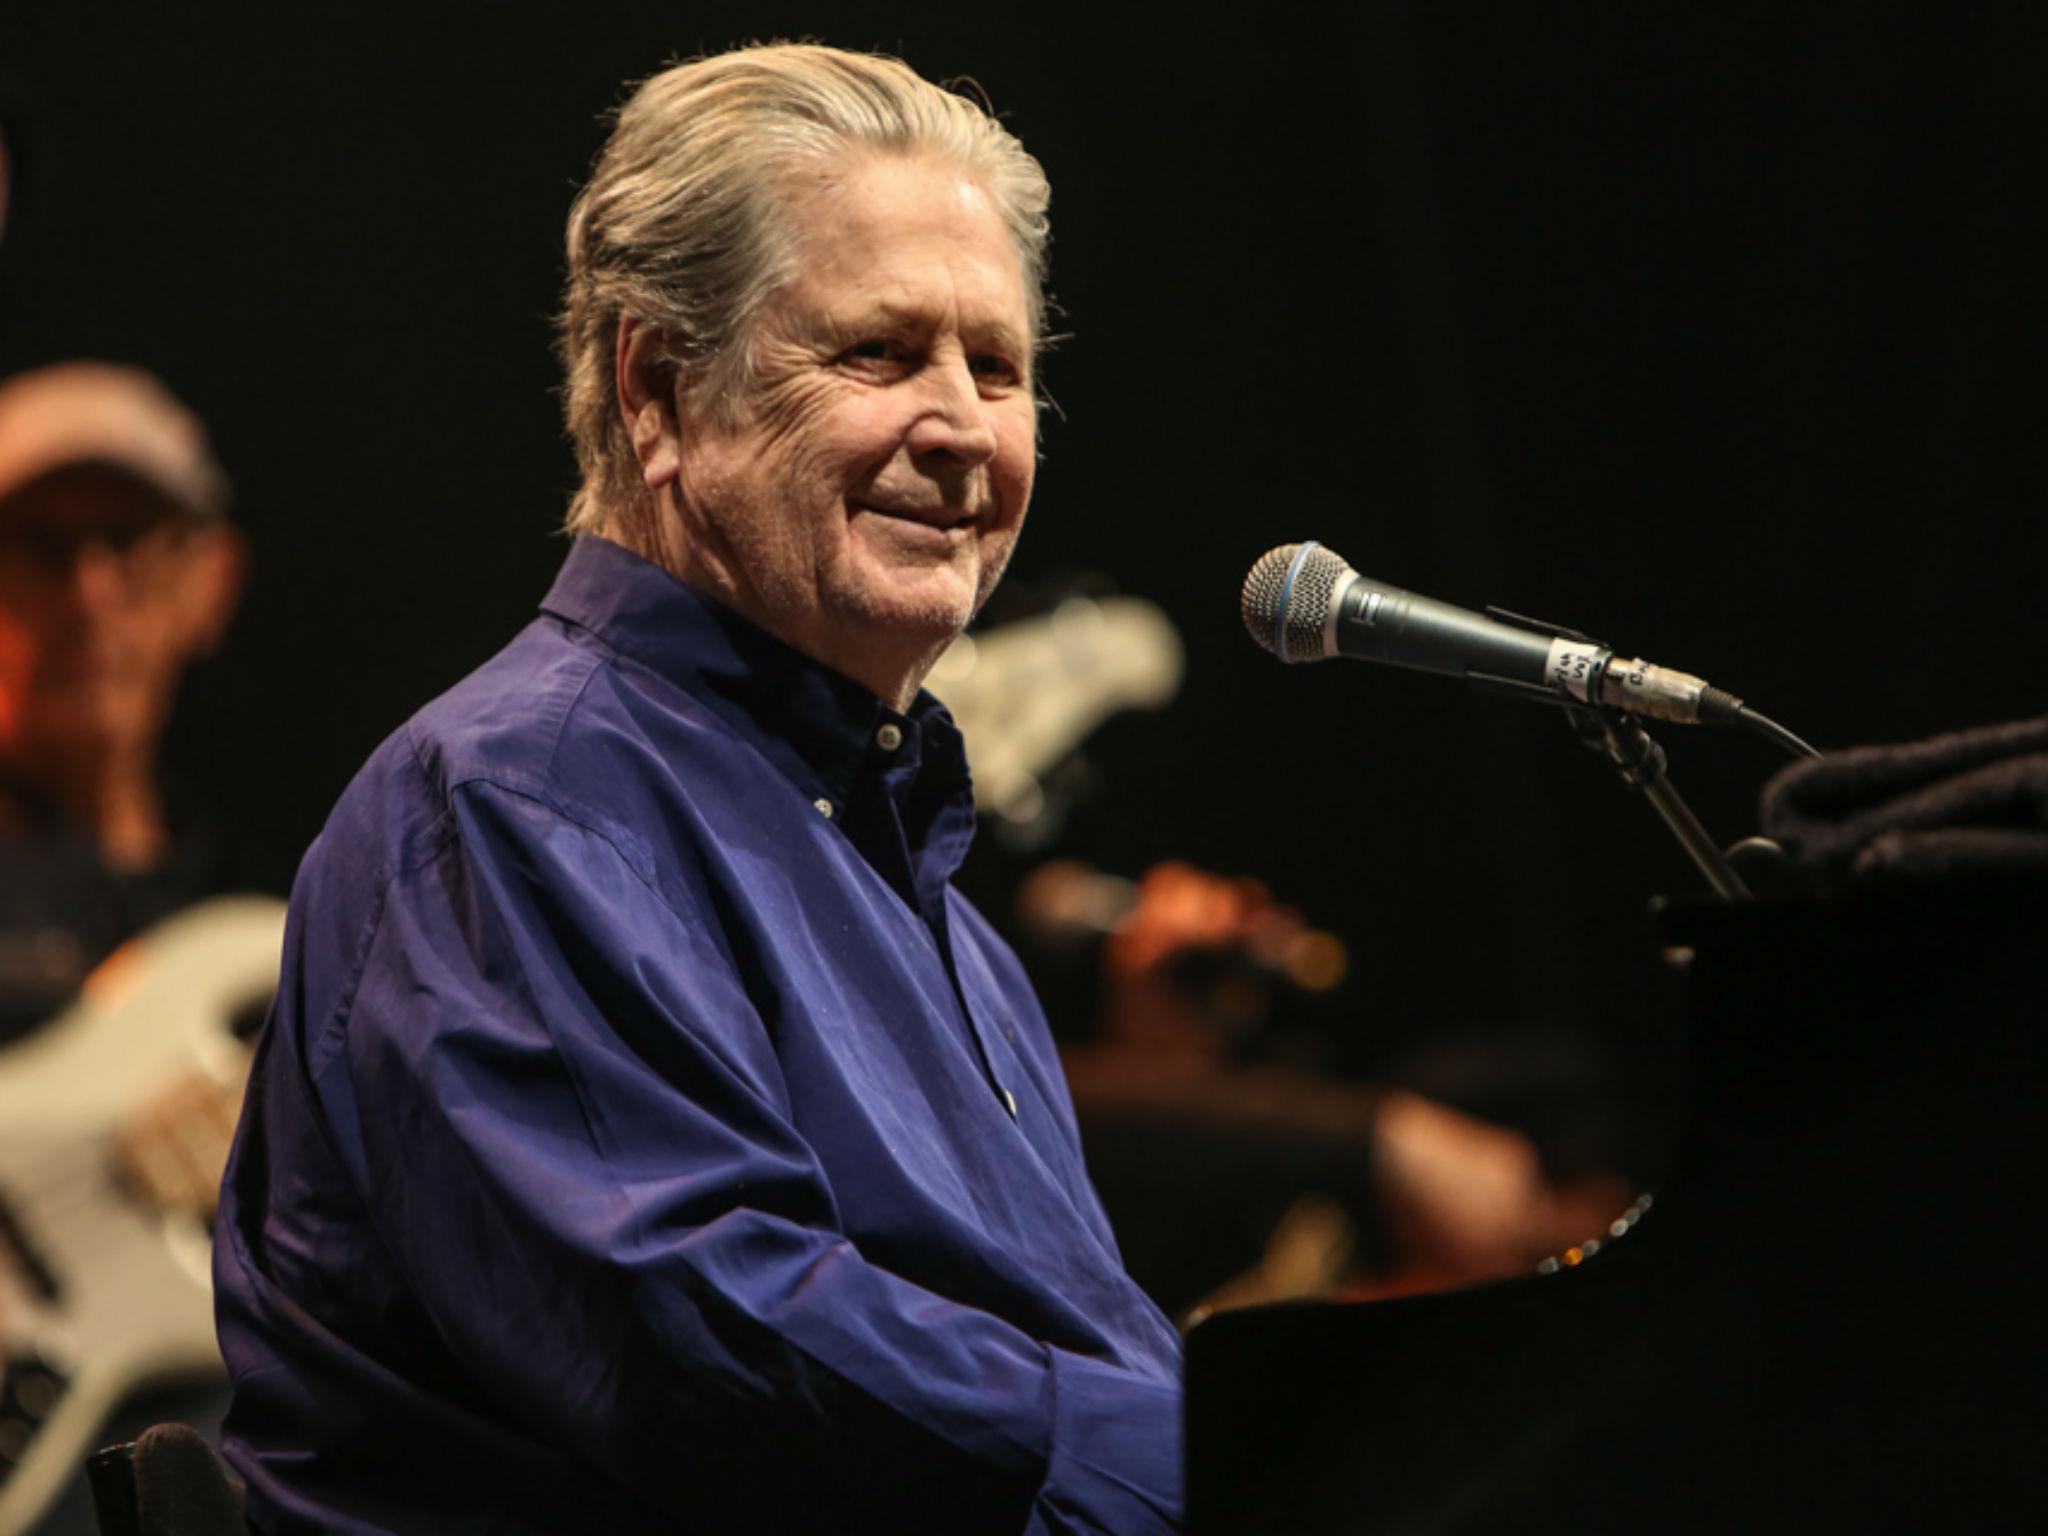 Brian Wilson was scheduled to perform some of his greatest hits this month